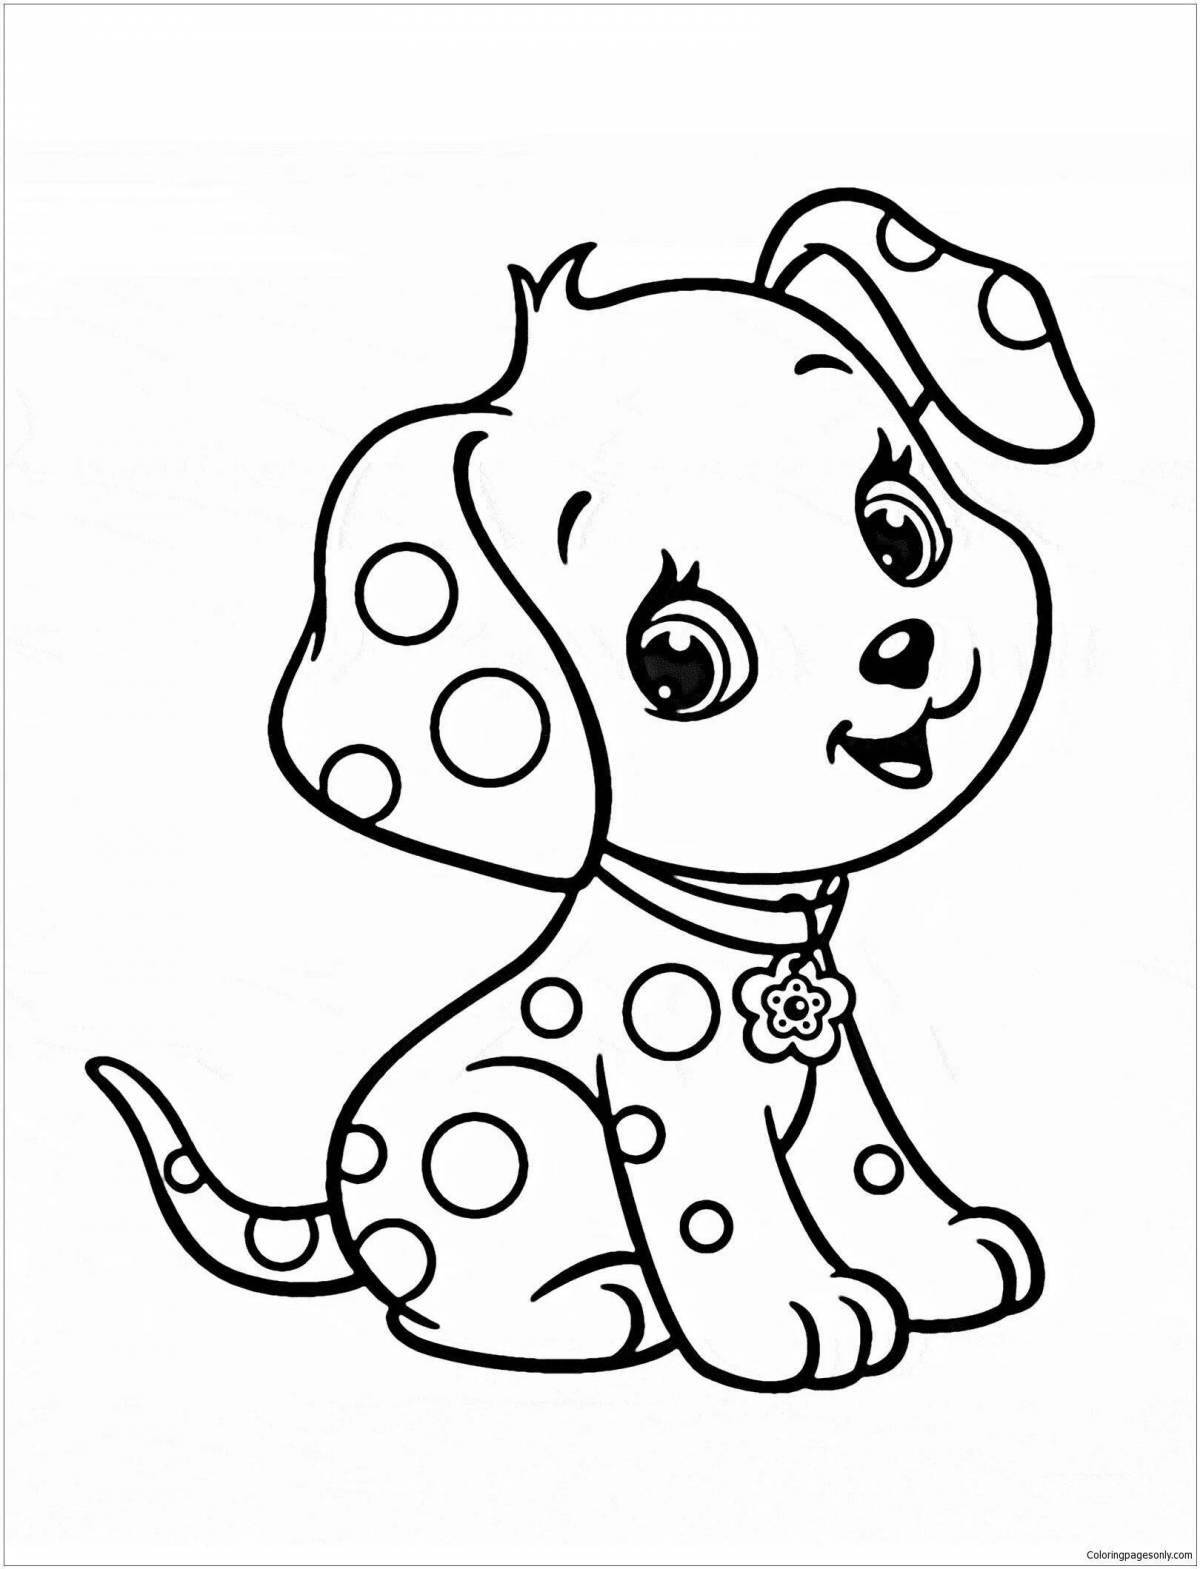 Fluffy cute dog coloring book for girls